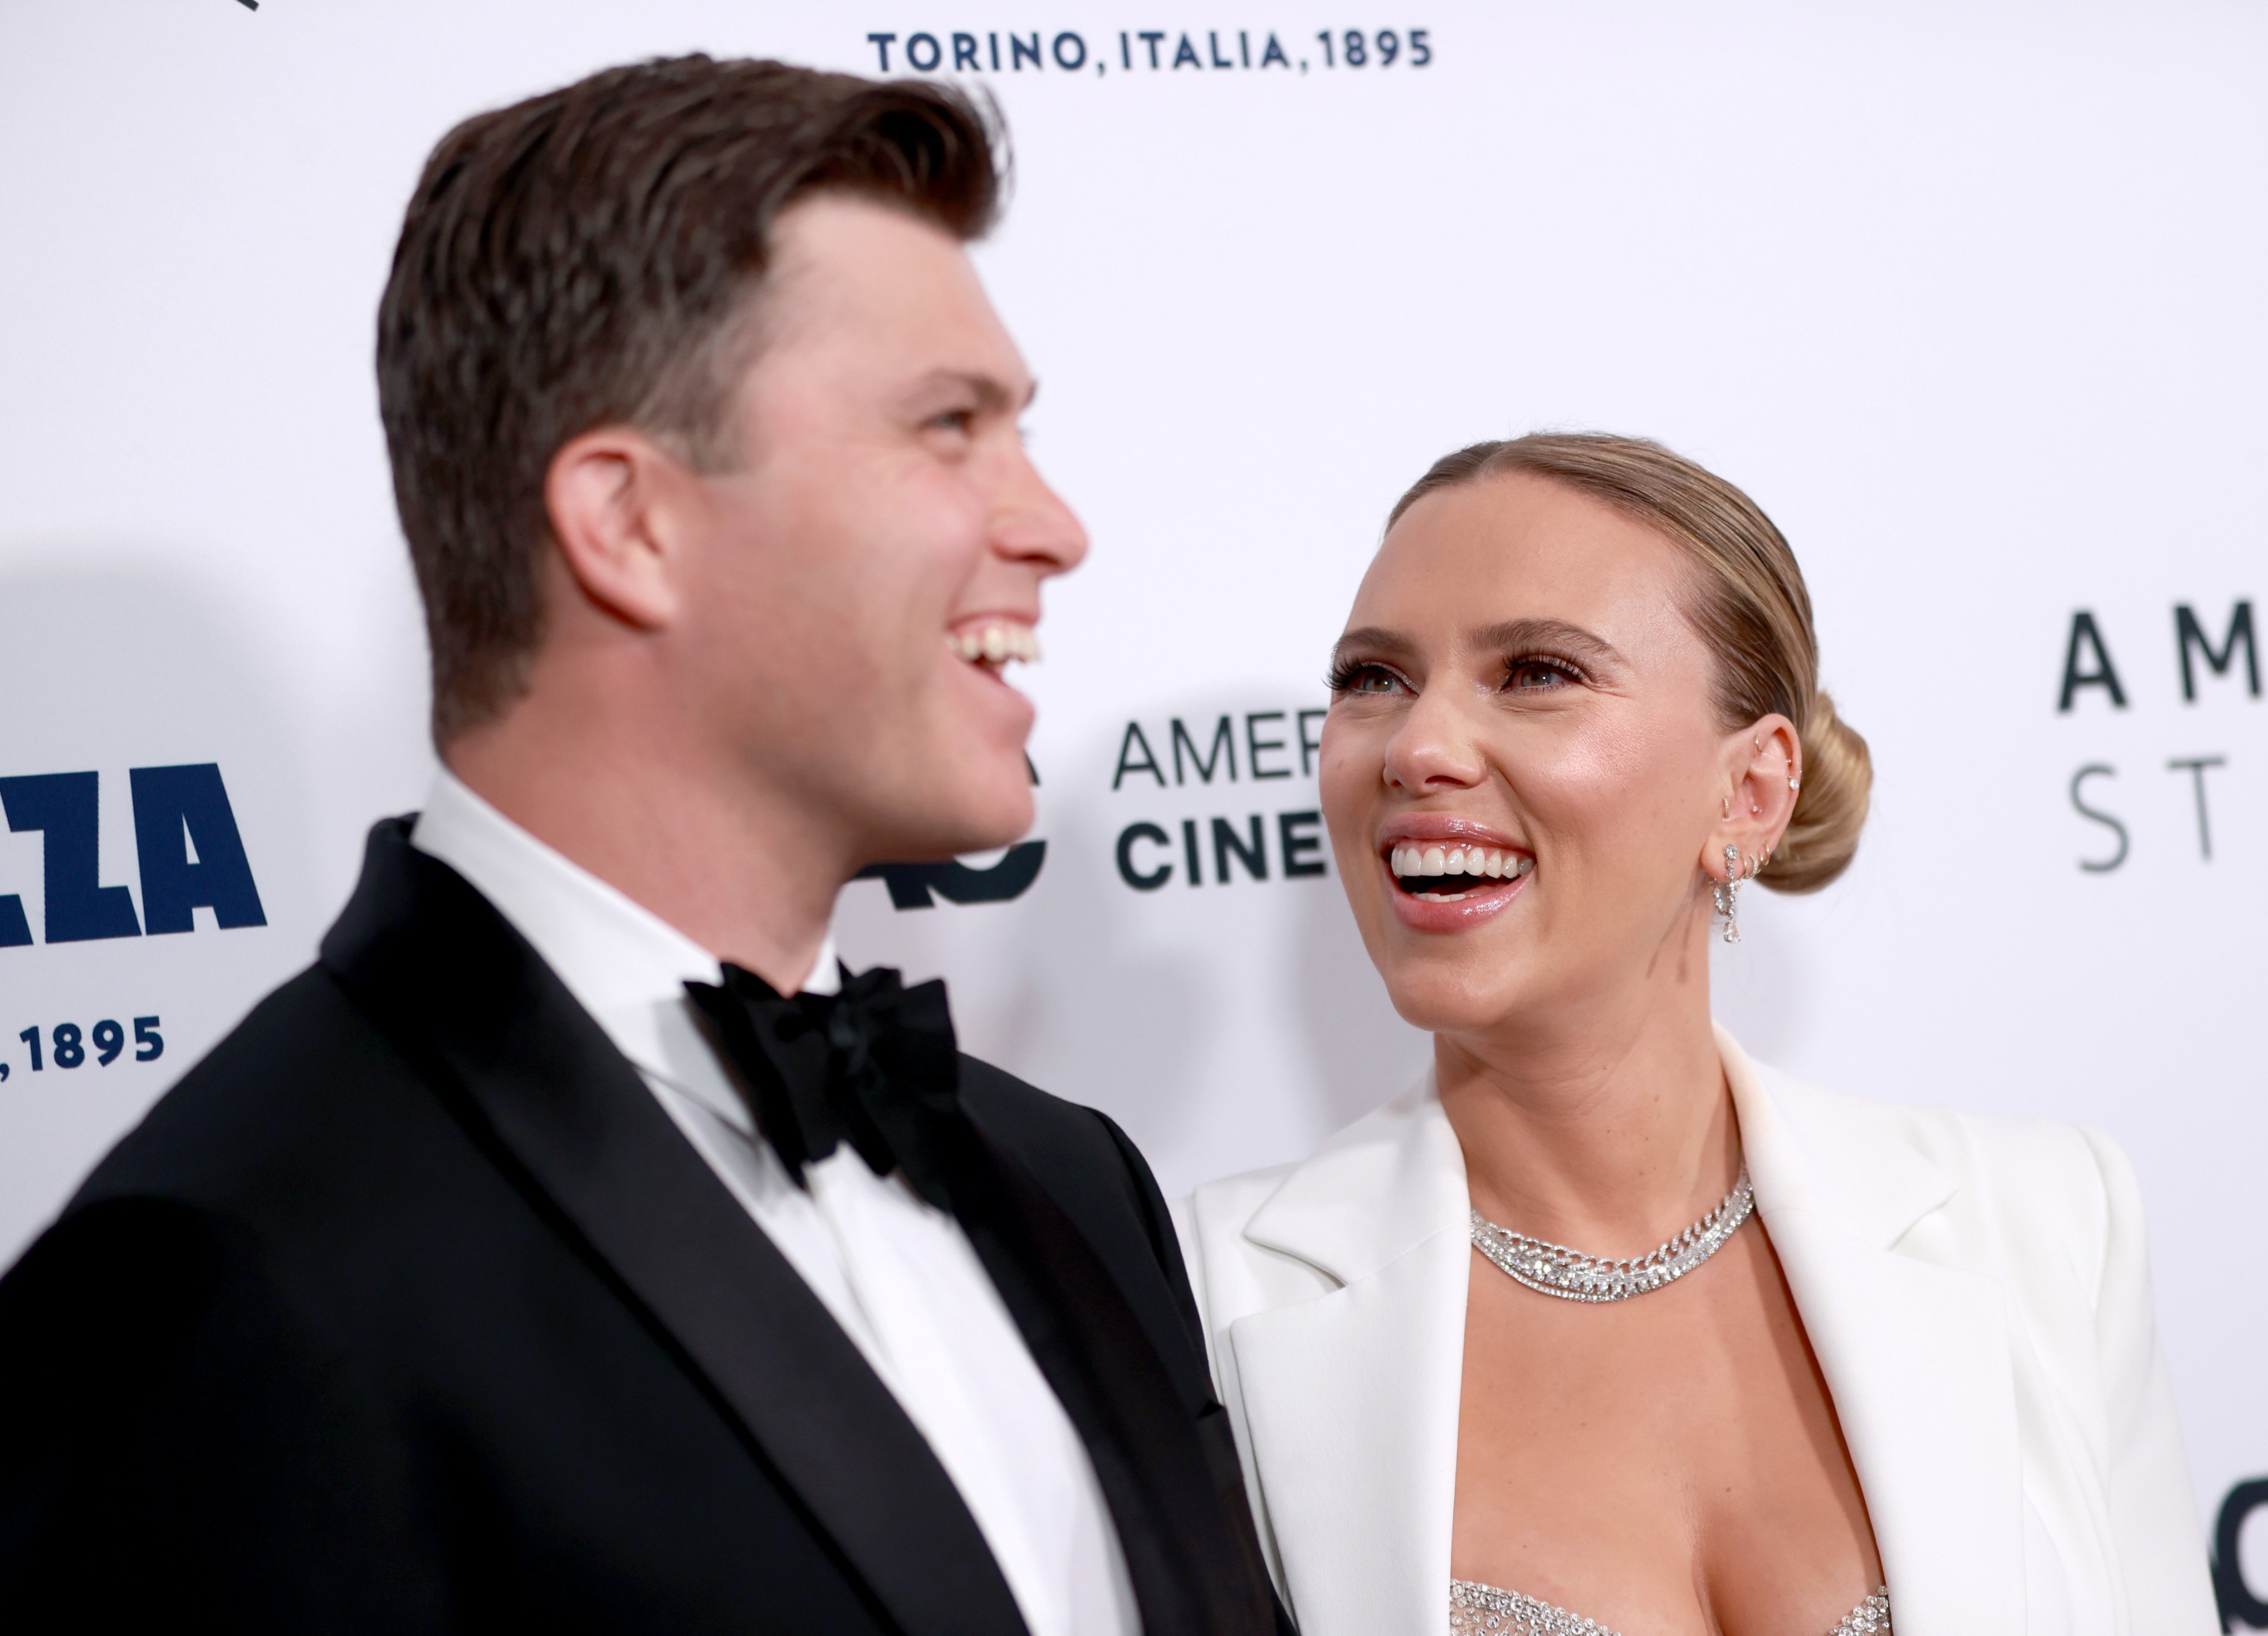 Colin Jost and Scarlett Johansson attend the 35th Annual American Cinematheque Awards Honoring Scarlett Johansson at The Beverly Hilton on November 18, 2021, in Beverly Hills, California. Source: Getty Images